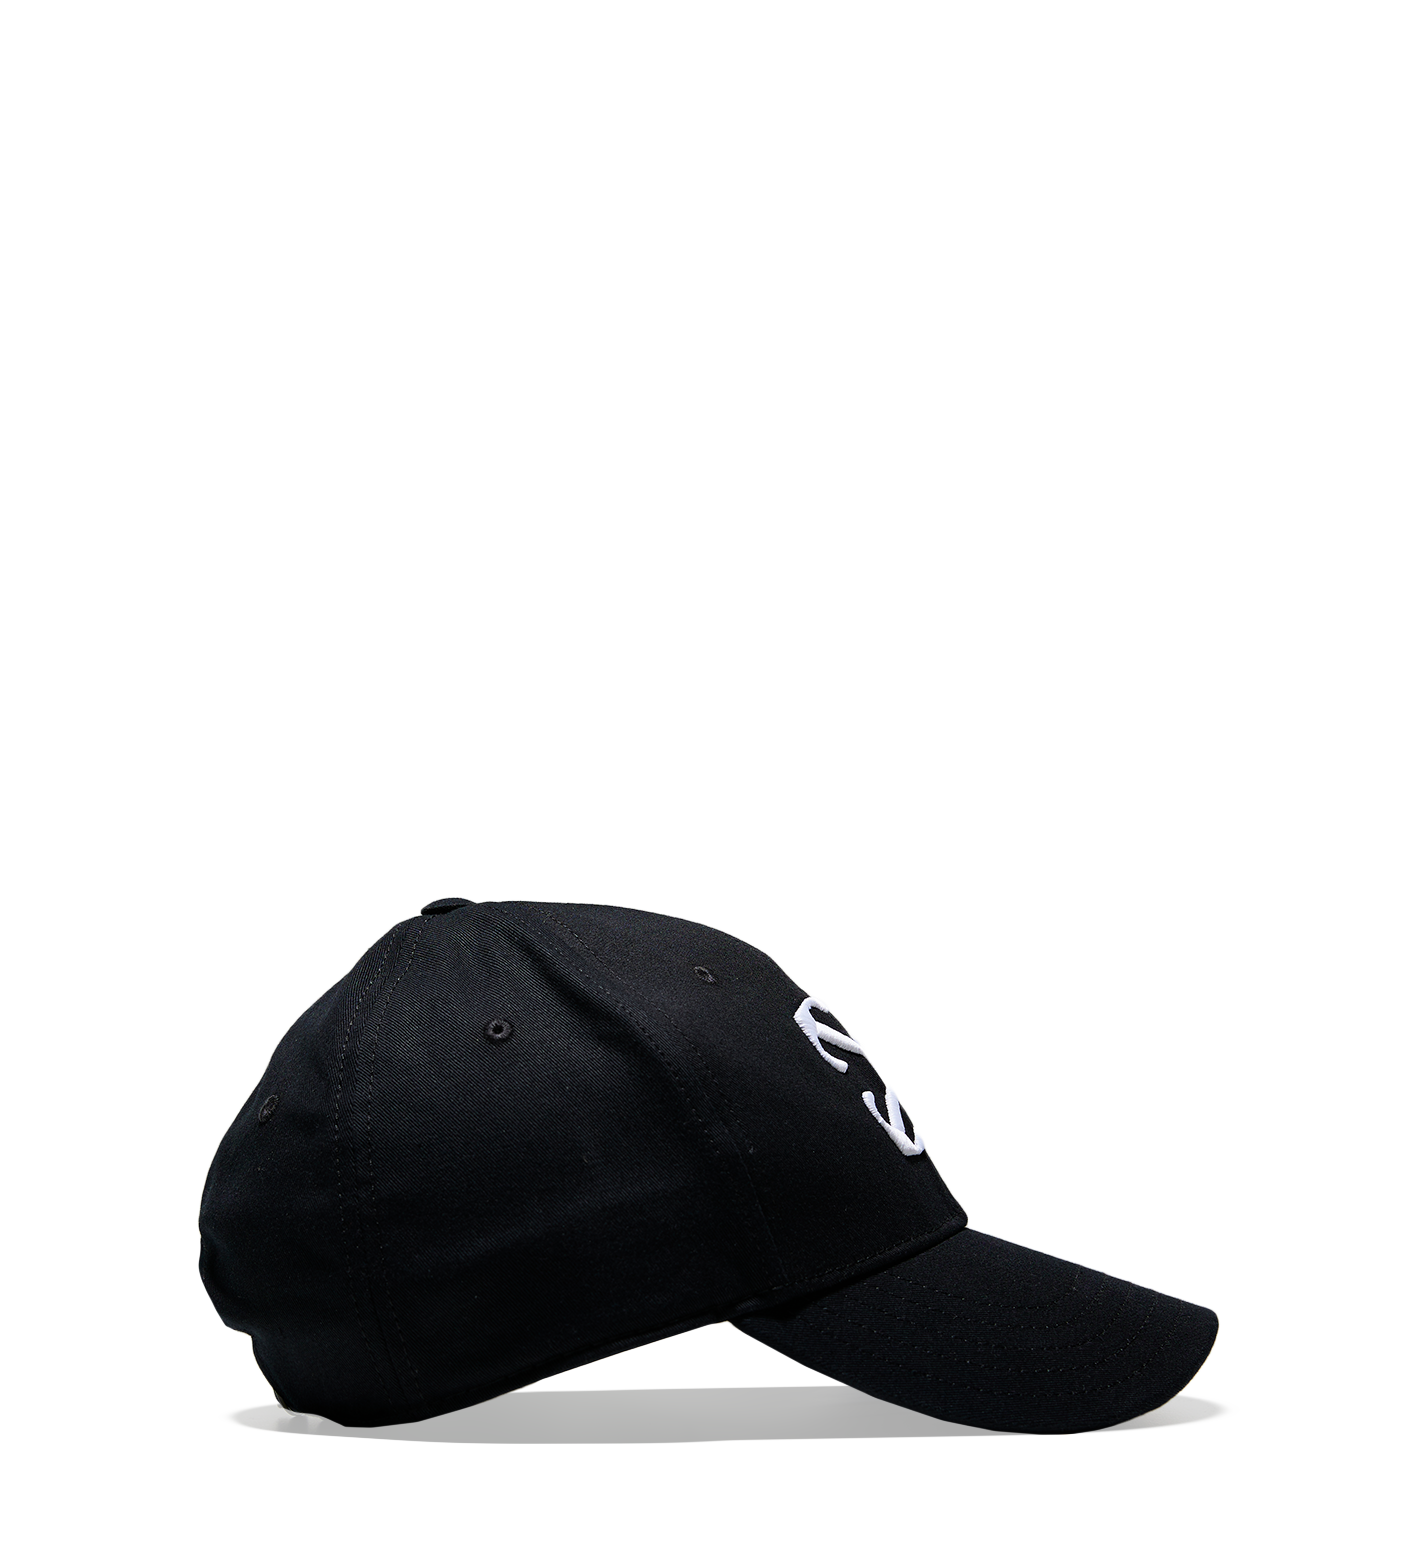 Arrows Embroidered Cap Black